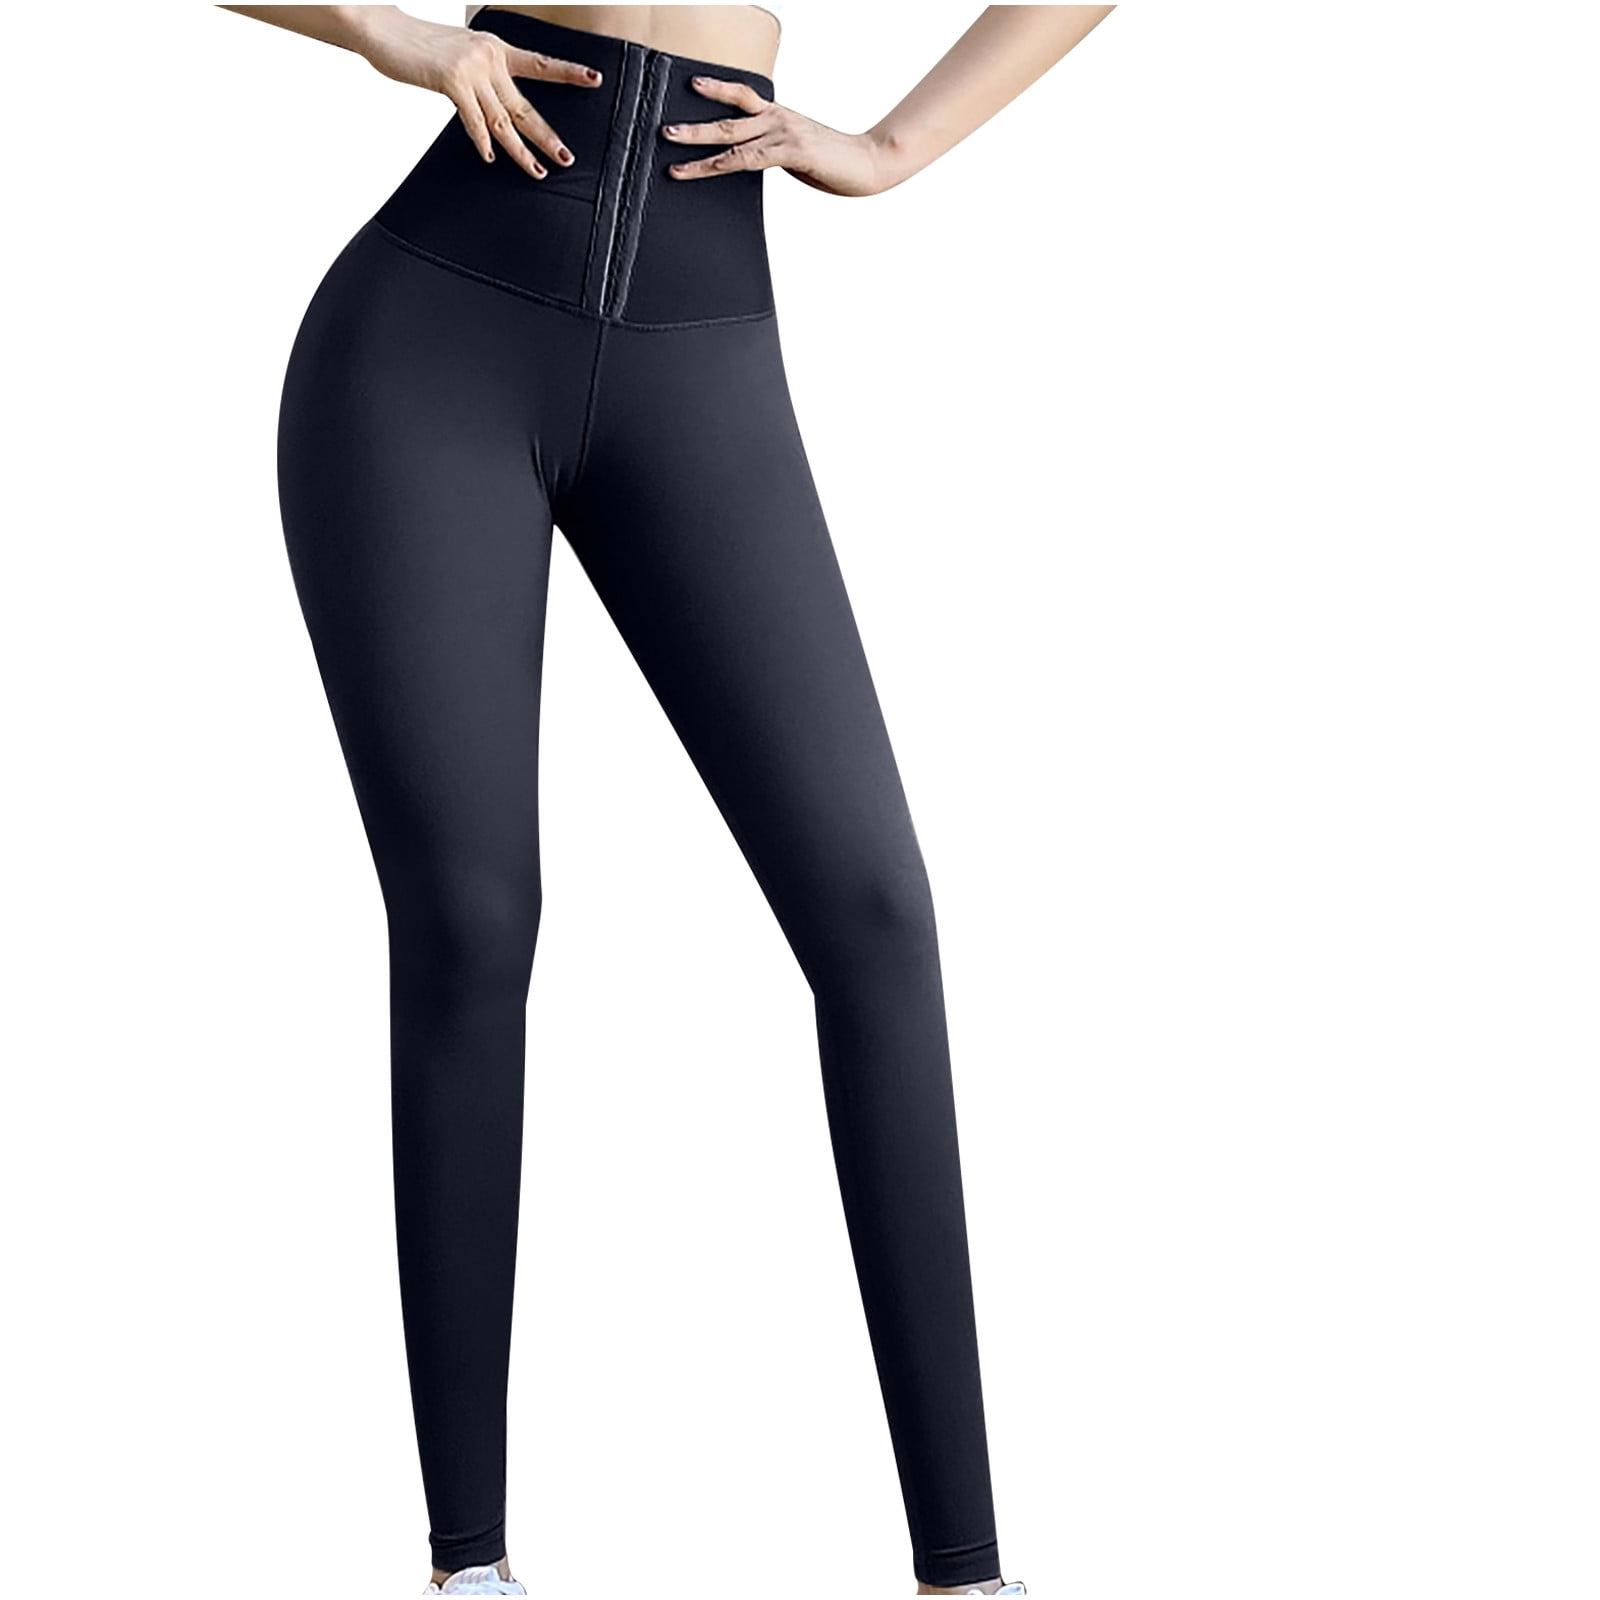 IROINNID Women's Pants Skinny Solid Color Fitness Yoga Pants High Waist  Body Shaping Breasted Elastic Pants Legging